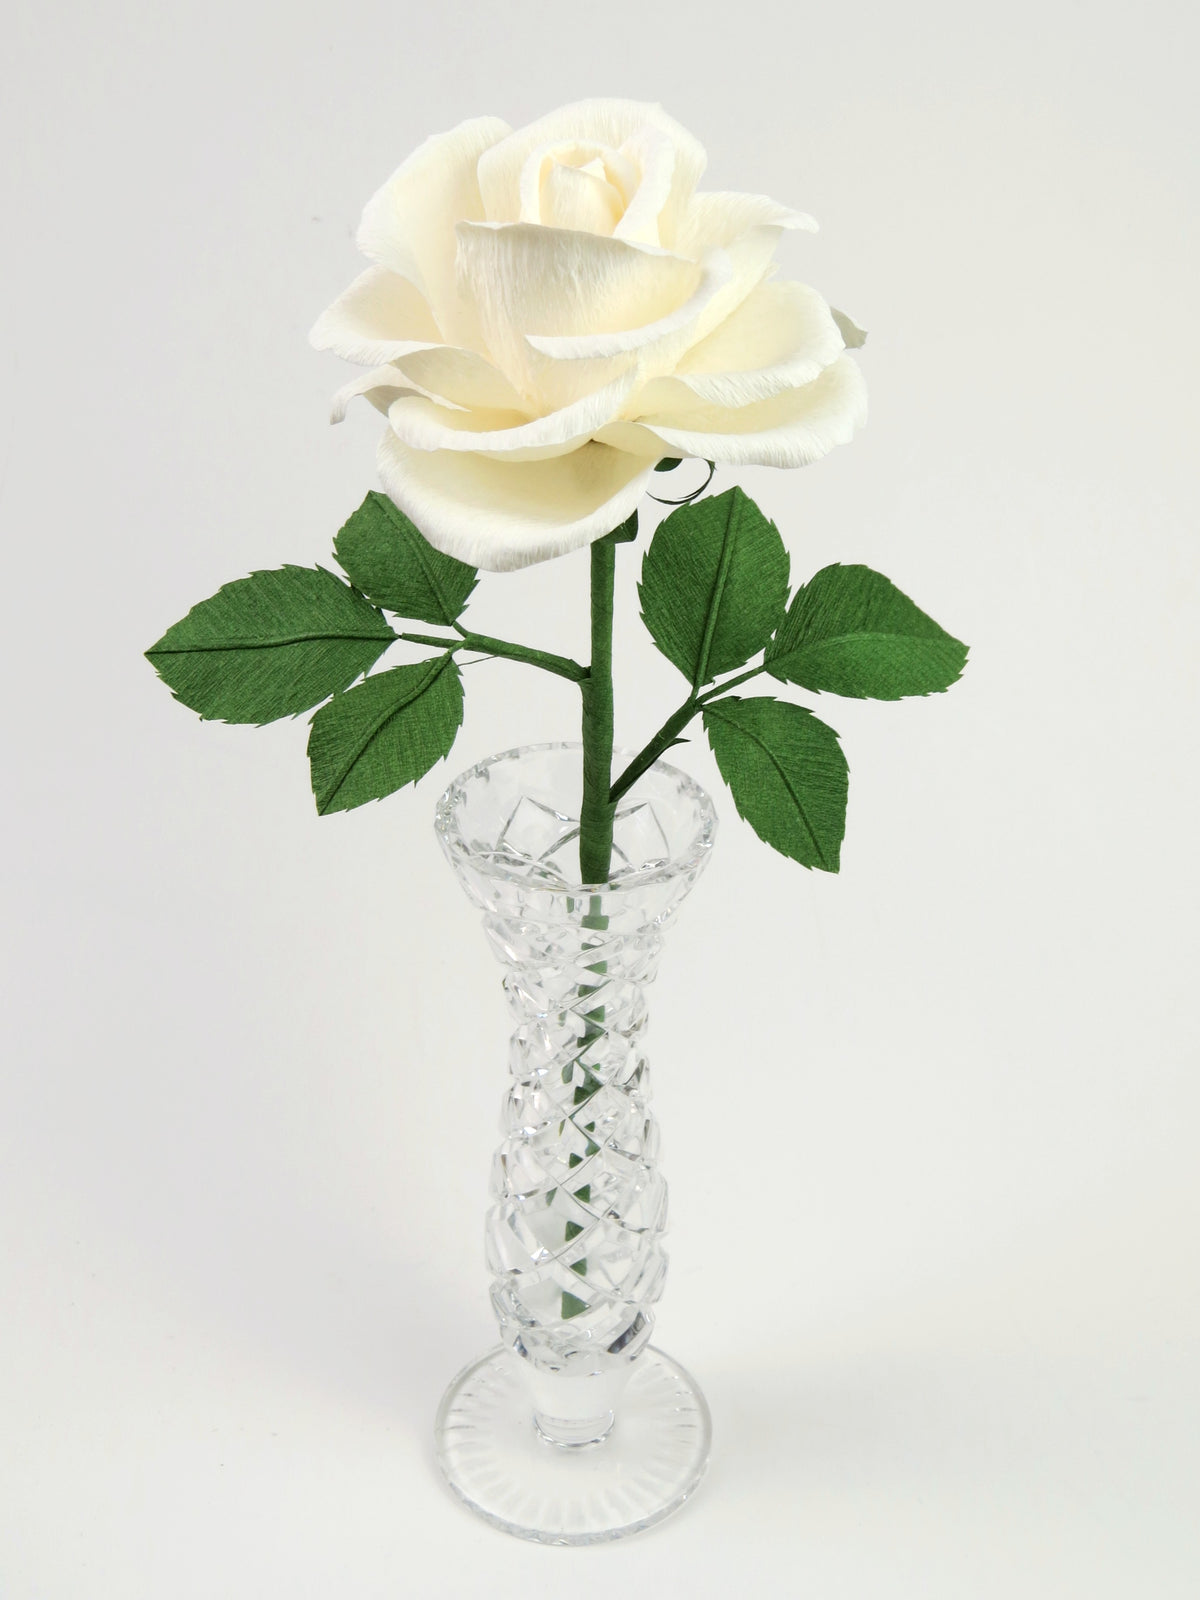 White paper rose with six leaves standing in a narrow glass vase against a light grey background